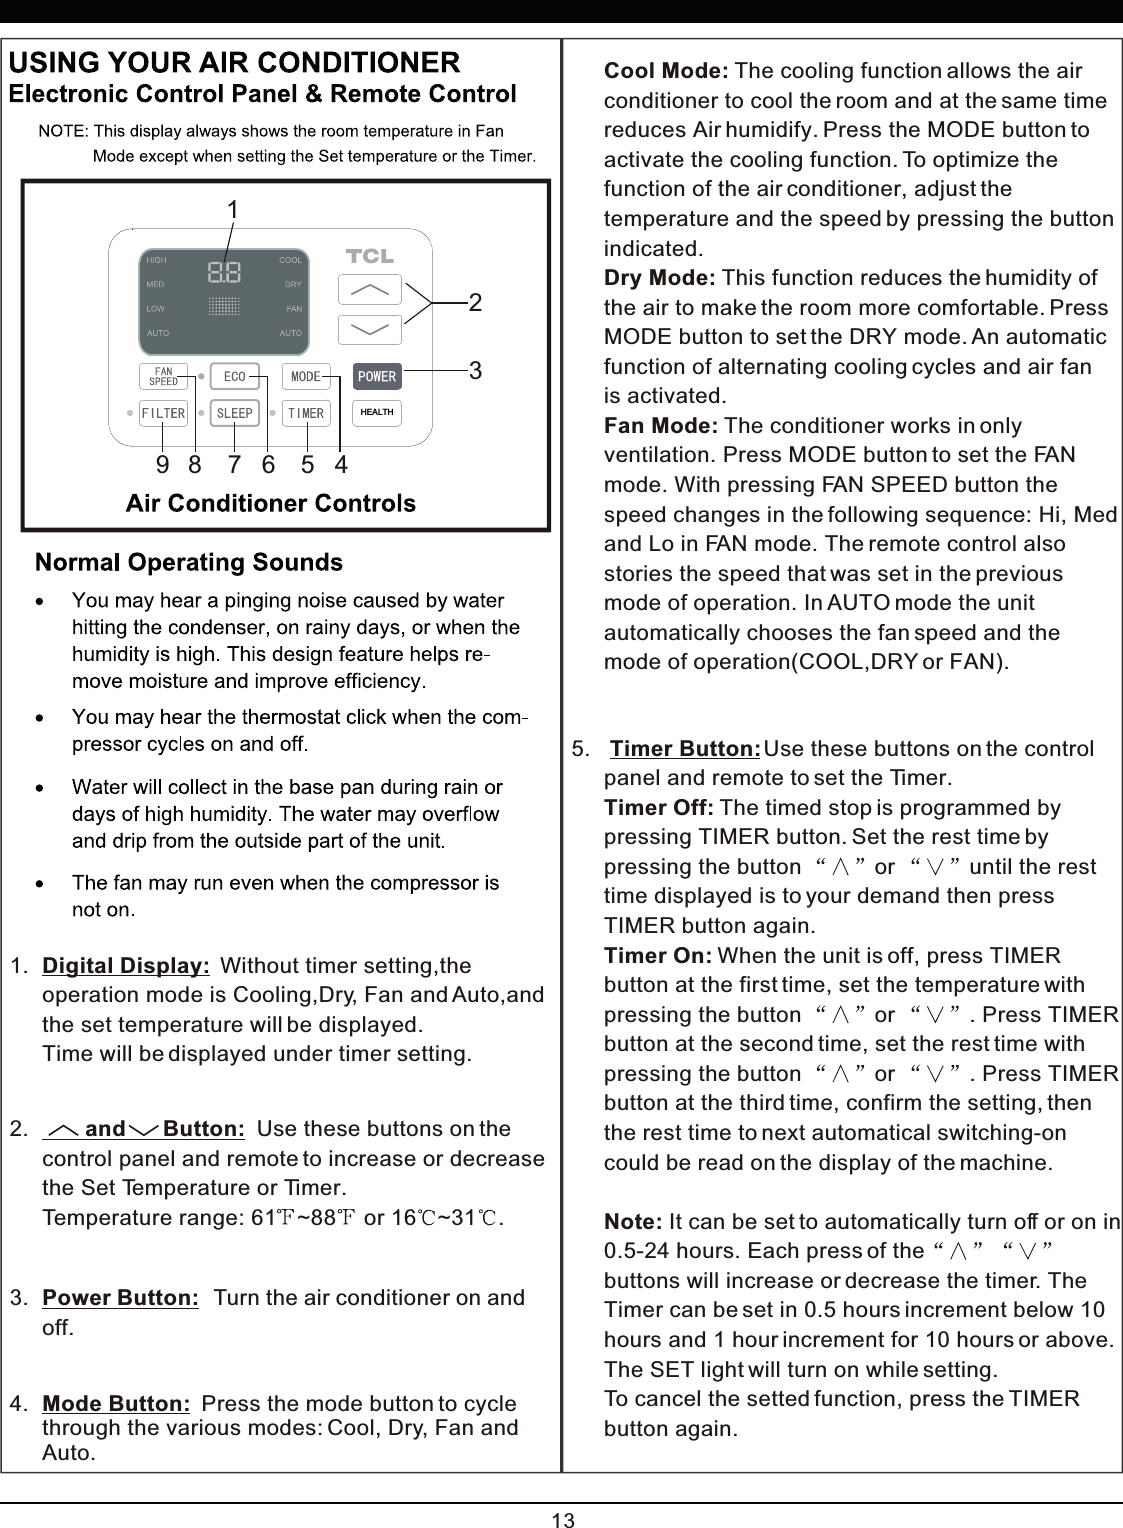 tcl portable air conditioner service manual